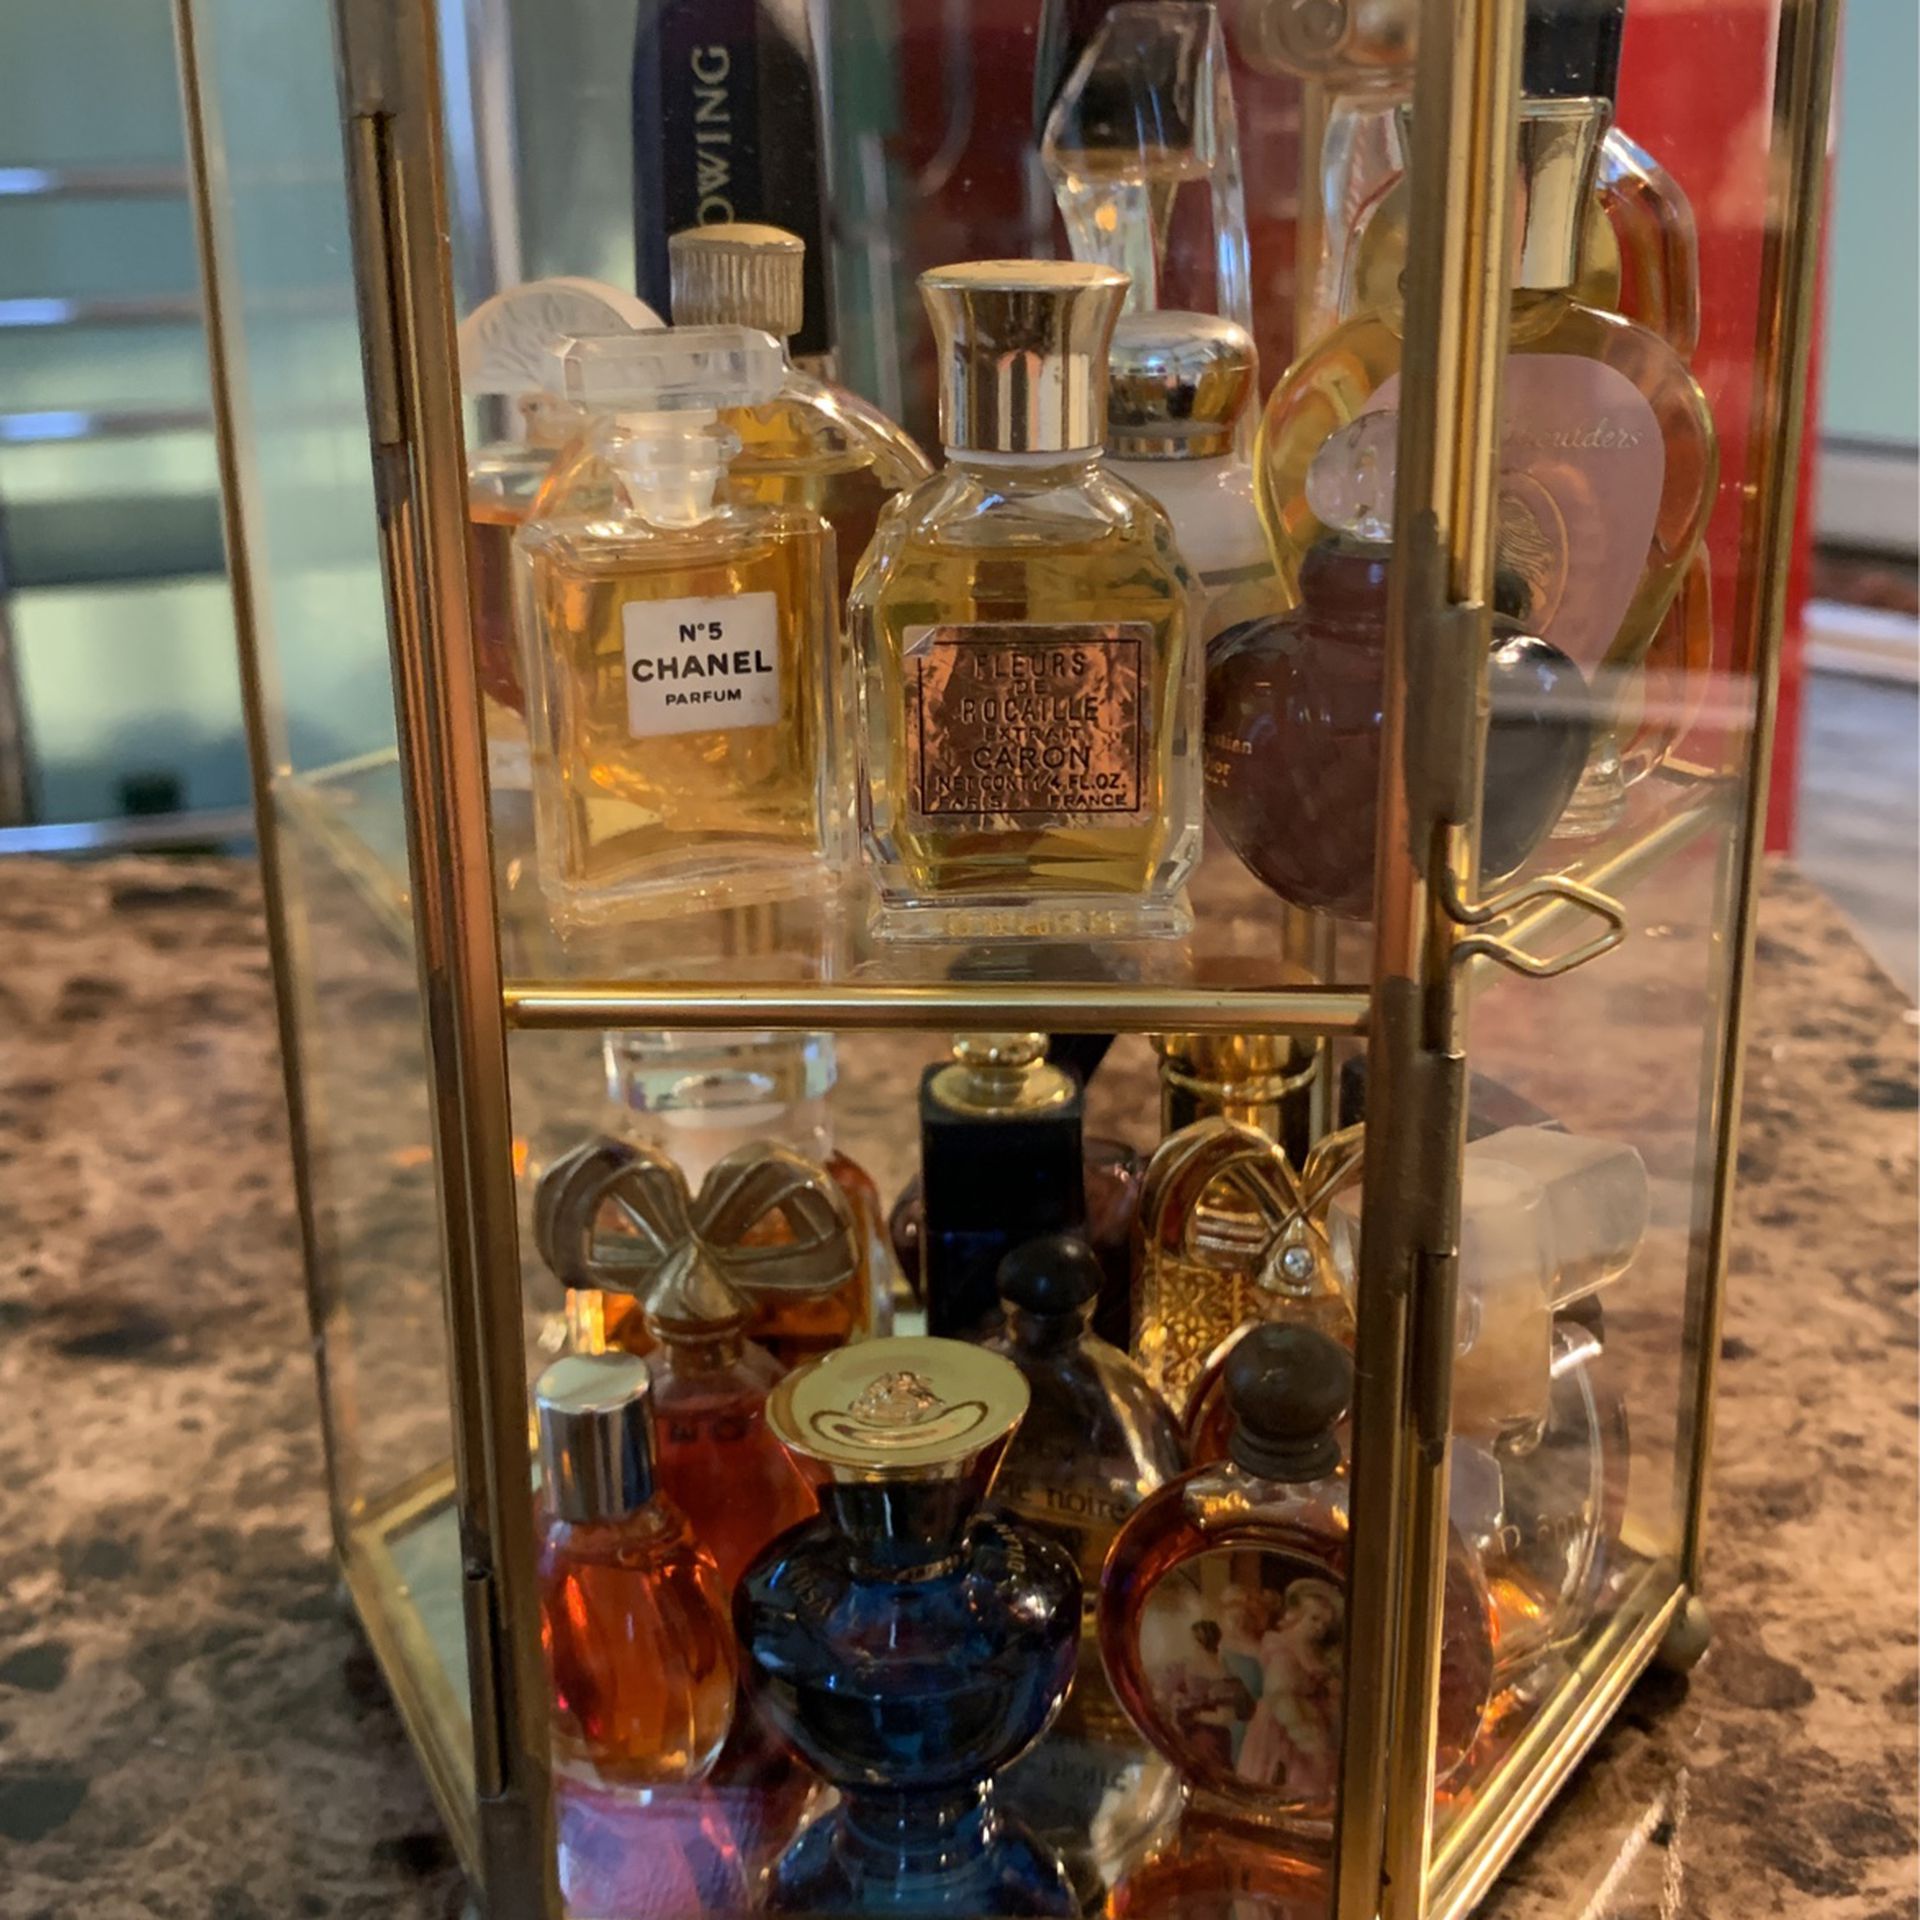 21 Perfumes In In Glass Case